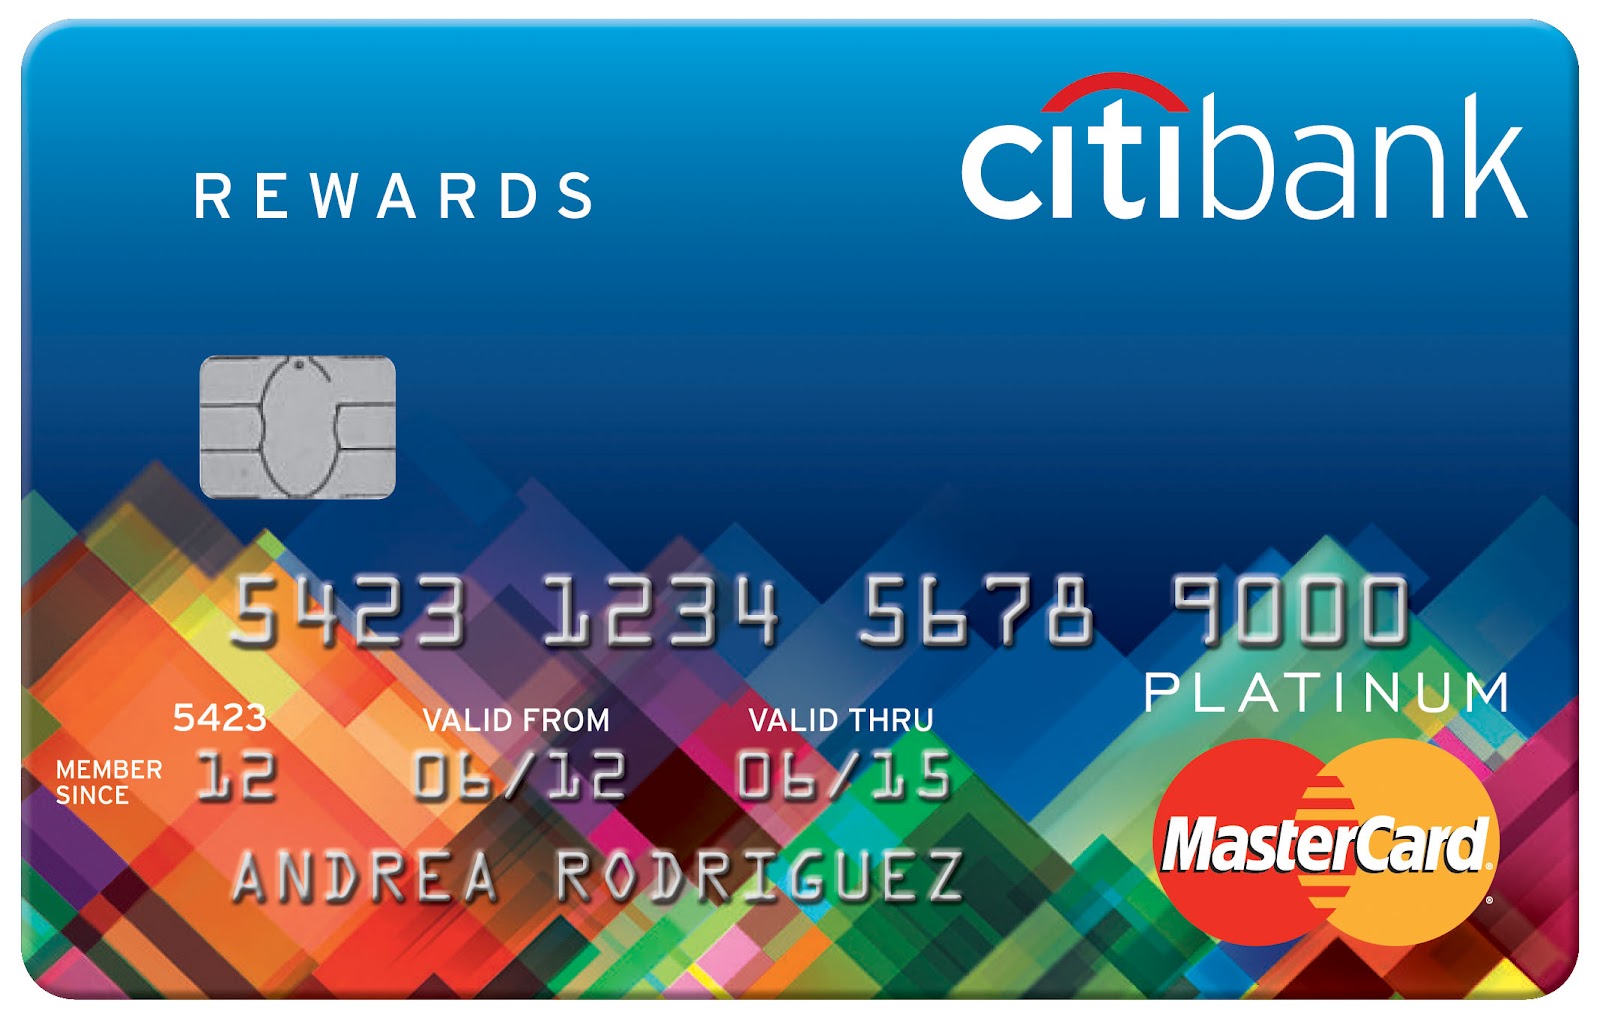 d-i-g-g-davao-citibank-introduces-the-ultimate-rewards-credit-card